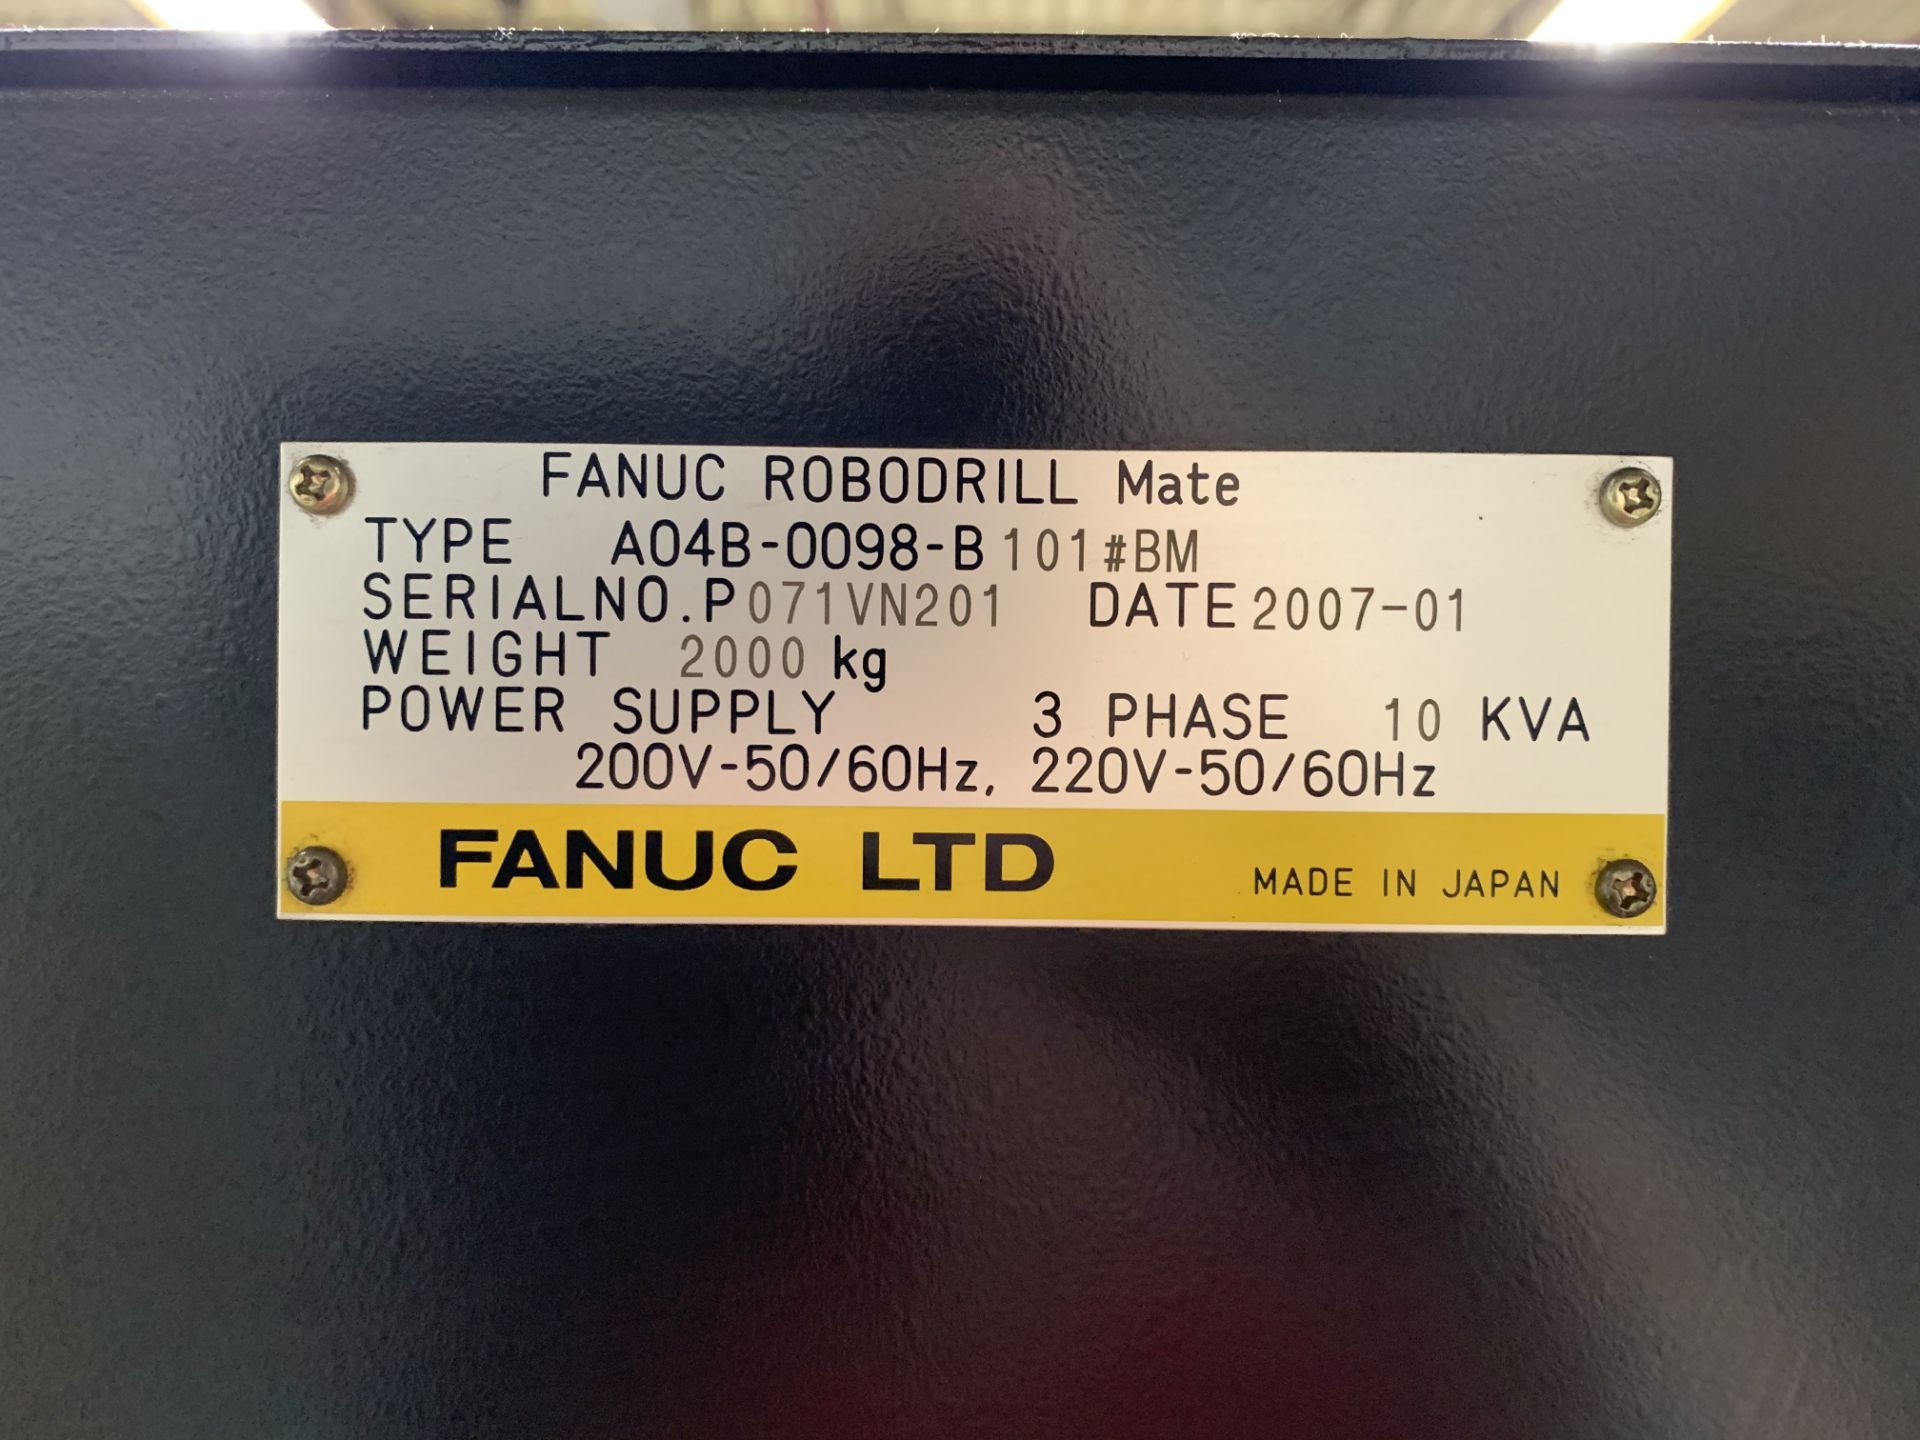 FANUC MODEL ROBODRILL MATE CNC DRILL AND TAPPING CENTER; S/N 071VN201, FANUC Oi-MC CONTROL, 25.6" - Image 8 of 8